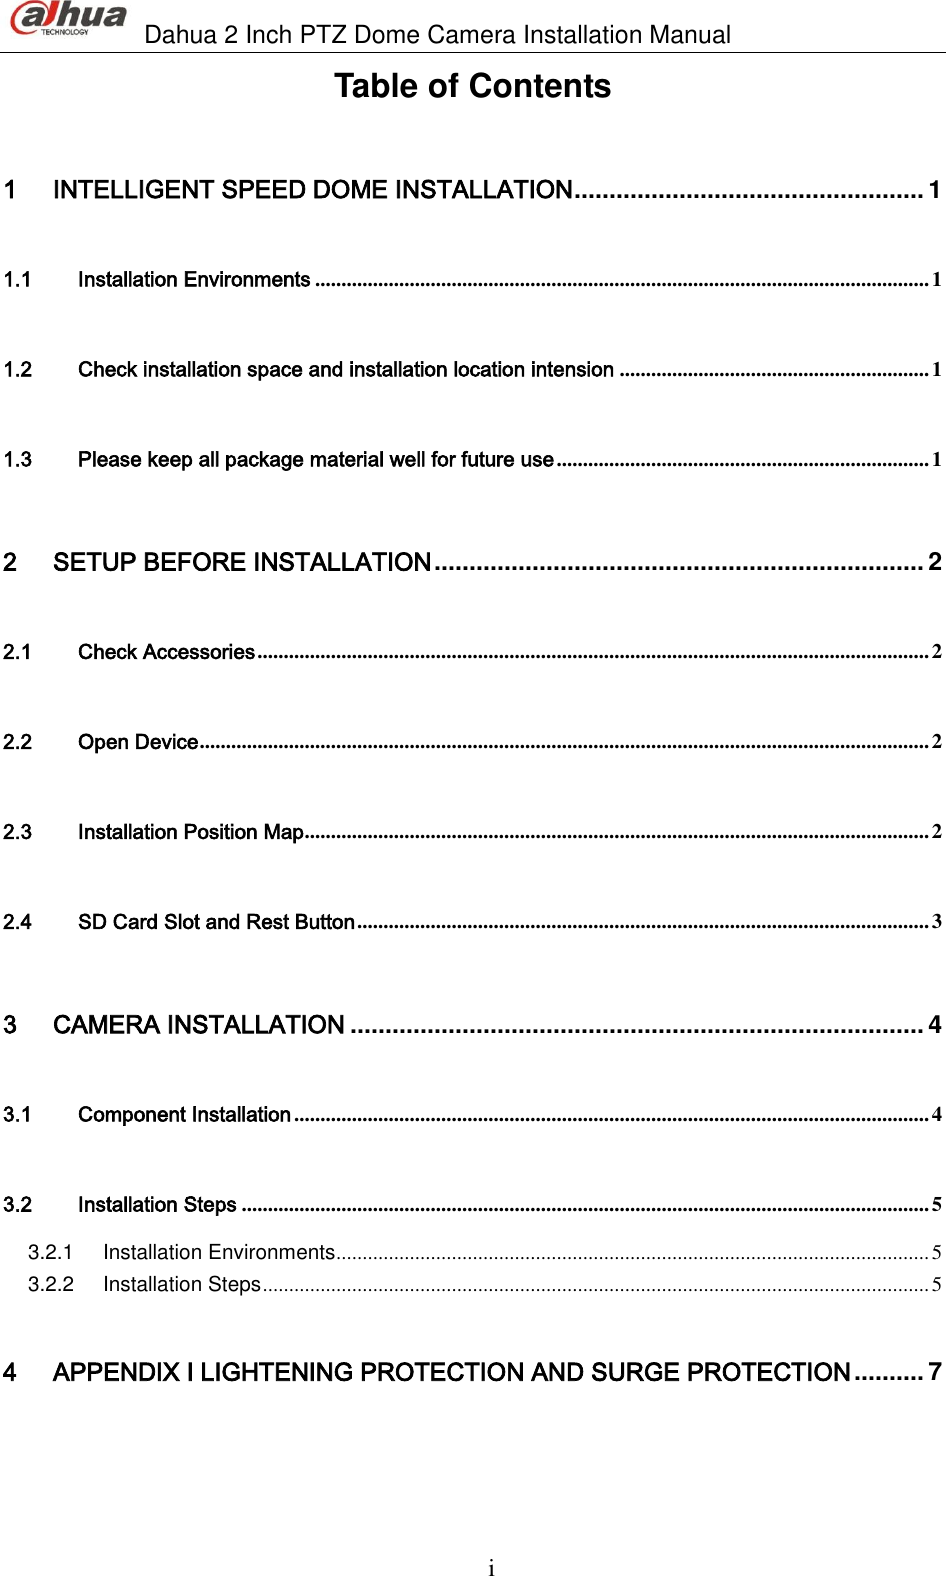                               Dahua 2 Inch PTZ Dome Camera Installation Manual  i Table of Contents 1 INTELLIGENT SPEED DOME INSTALLATION .................................................. 1 1.1 Installation Environments ..................................................................................................................... 1 1.2 Check installation space and installation location intension ........................................................... 1 1.3 Please keep all package material well for future use ....................................................................... 1 2 SETUP BEFORE INSTALLATION ...................................................................... 2 2.1 Check Accessories ................................................................................................................................ 2 2.2 Open Device ........................................................................................................................................... 2 2.3 Installation Position Map ....................................................................................................................... 2 2.4 SD Card Slot and Rest Button ............................................................................................................. 3 3 CAMERA INSTALLATION .................................................................................. 4 3.1 Component Installation ......................................................................................................................... 4 3.2 Installation Steps ................................................................................................................................... 5 3.2.1 Installation Environments ................................................................................................................. 5 3.2.2 Installation Steps ............................................................................................................................... 5 4 APPENDIX Ⅰ LIGHTENING PROTECTION AND SURGE PROTECTION .......... 7 